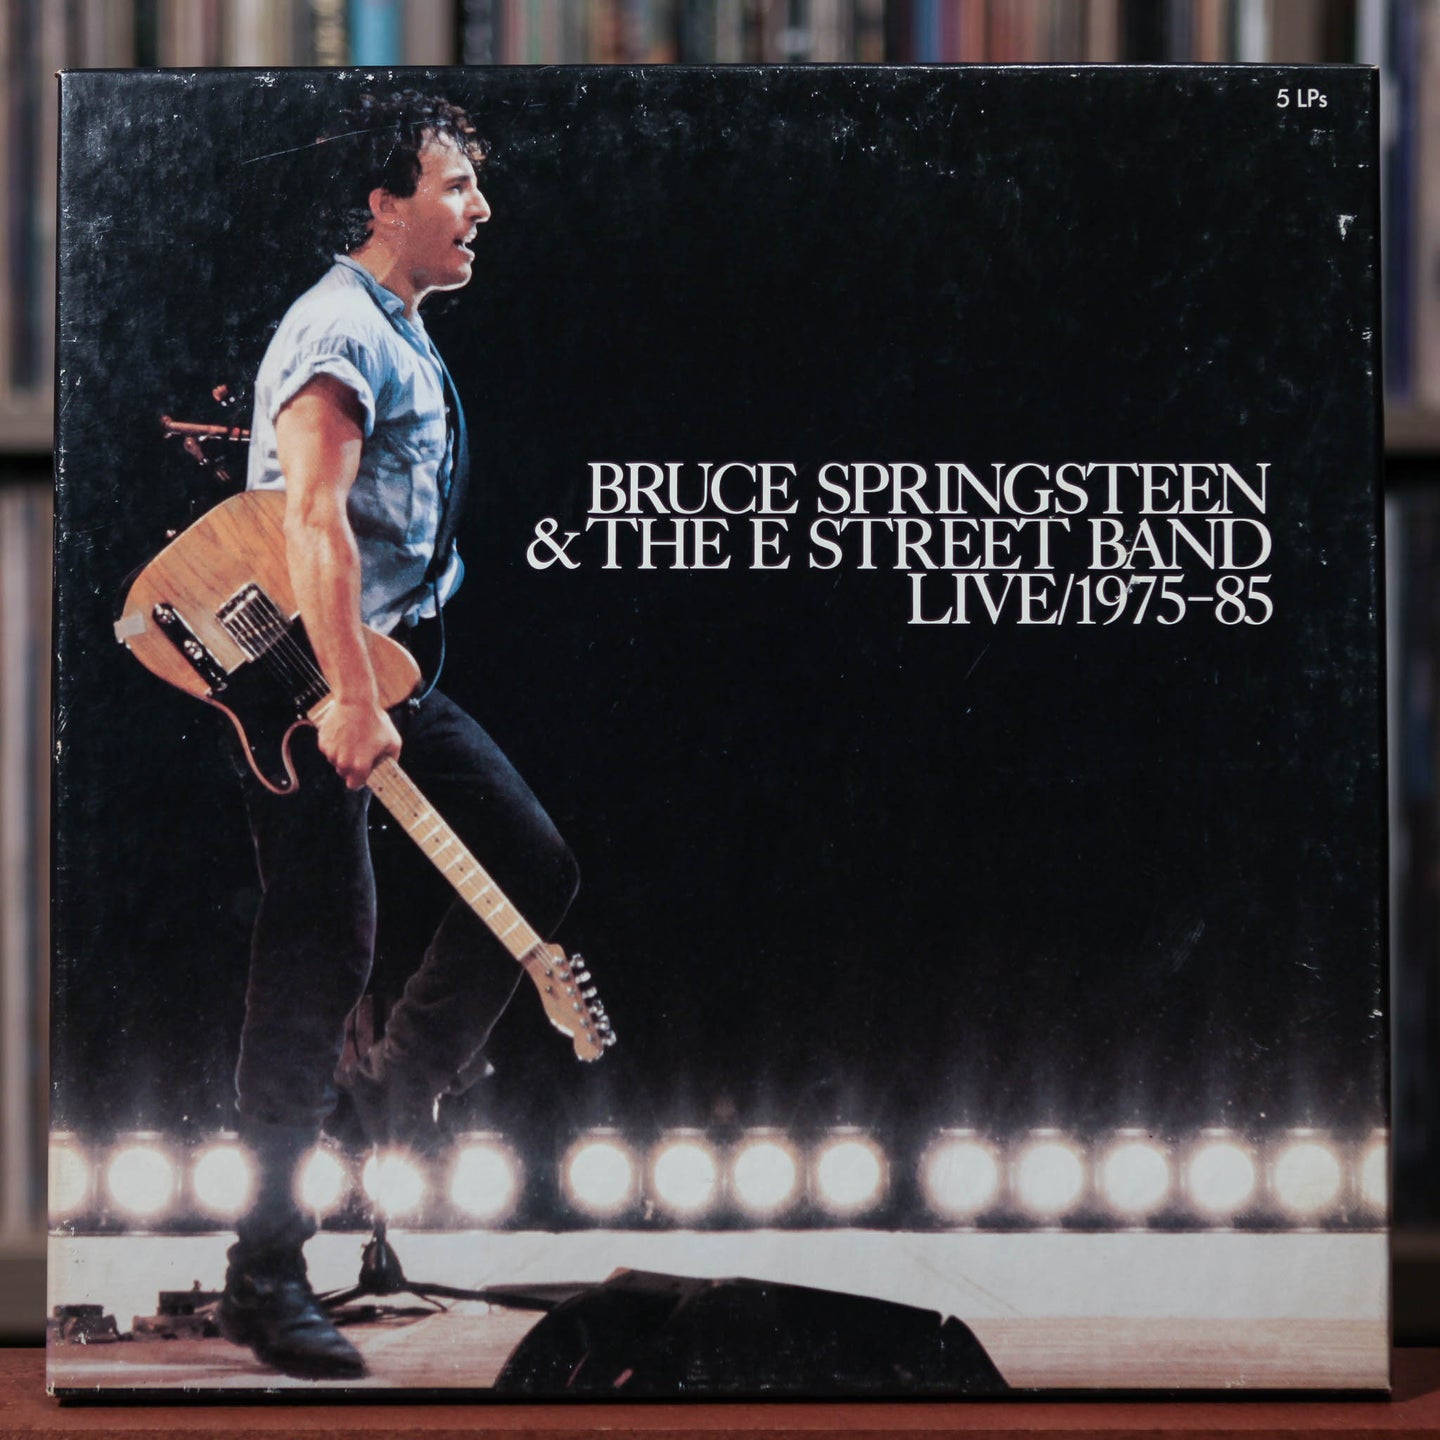 Bruce Springsteen & The E Street Band - 5LP LIVE/1975-85 - 1986 Columbia, VG/EX